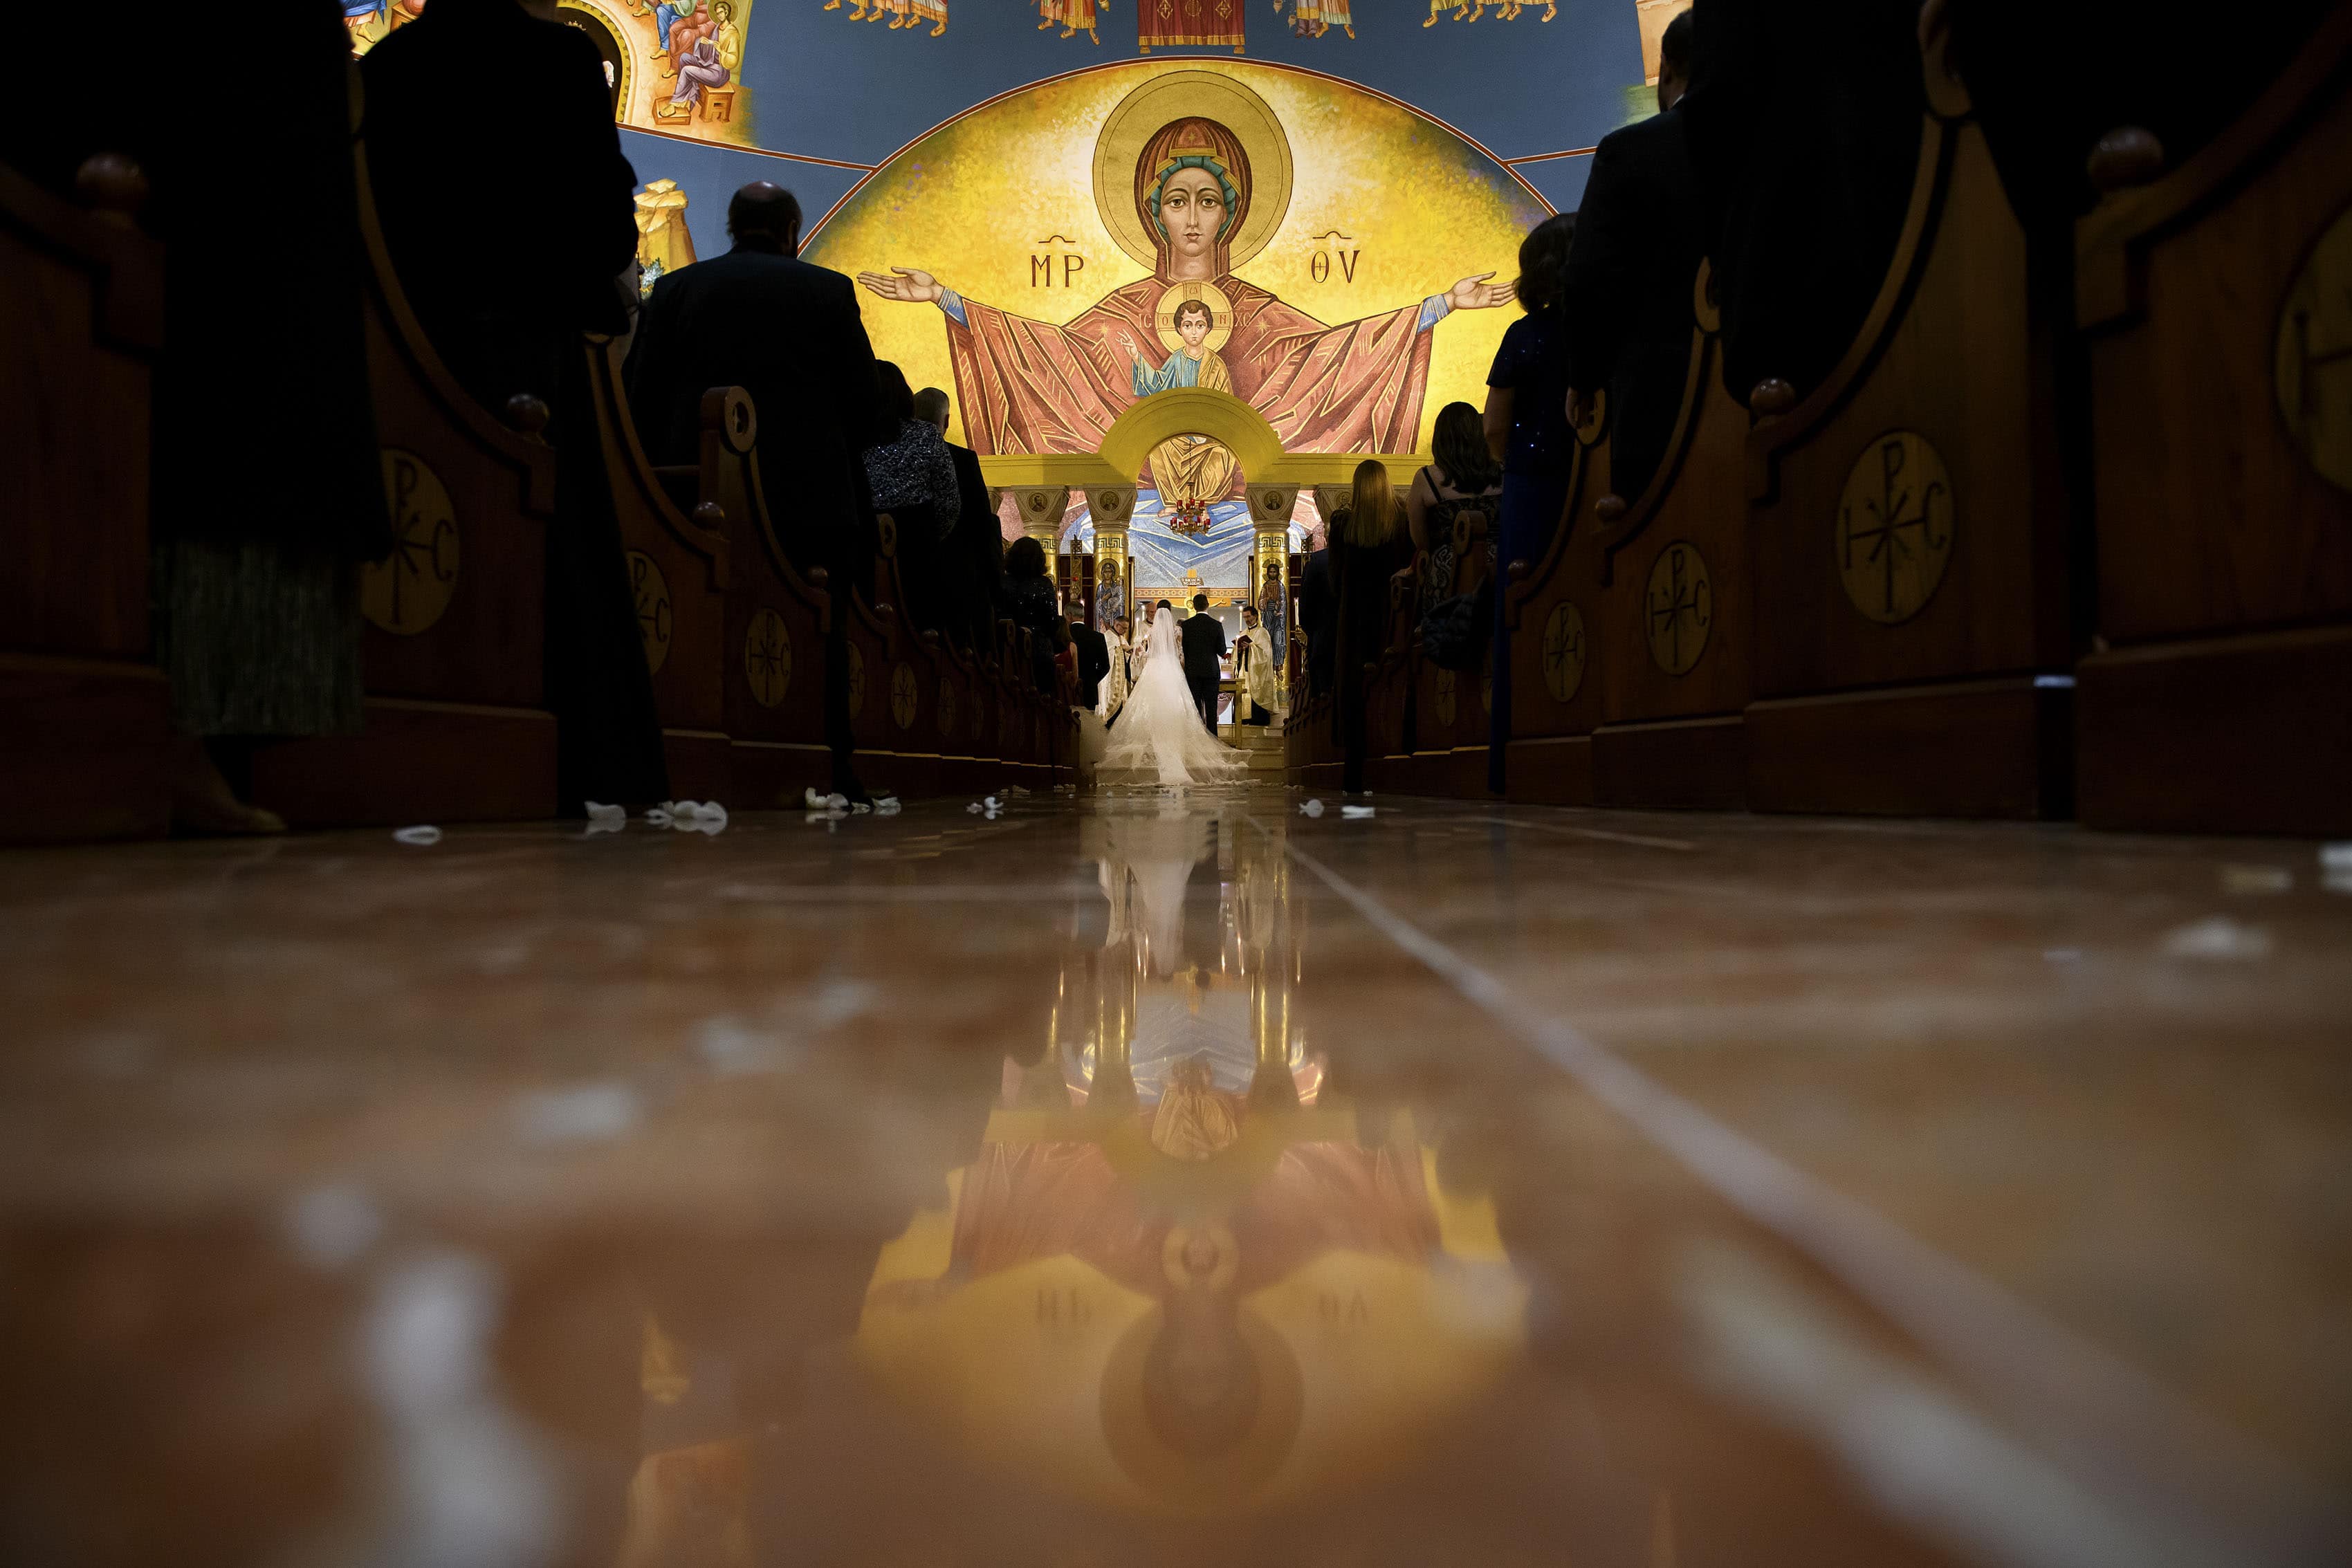 The bride and groom stand at the altar at the Assumption of the Theotokos Greek Orthodox Cathedral during their wedding ceremony